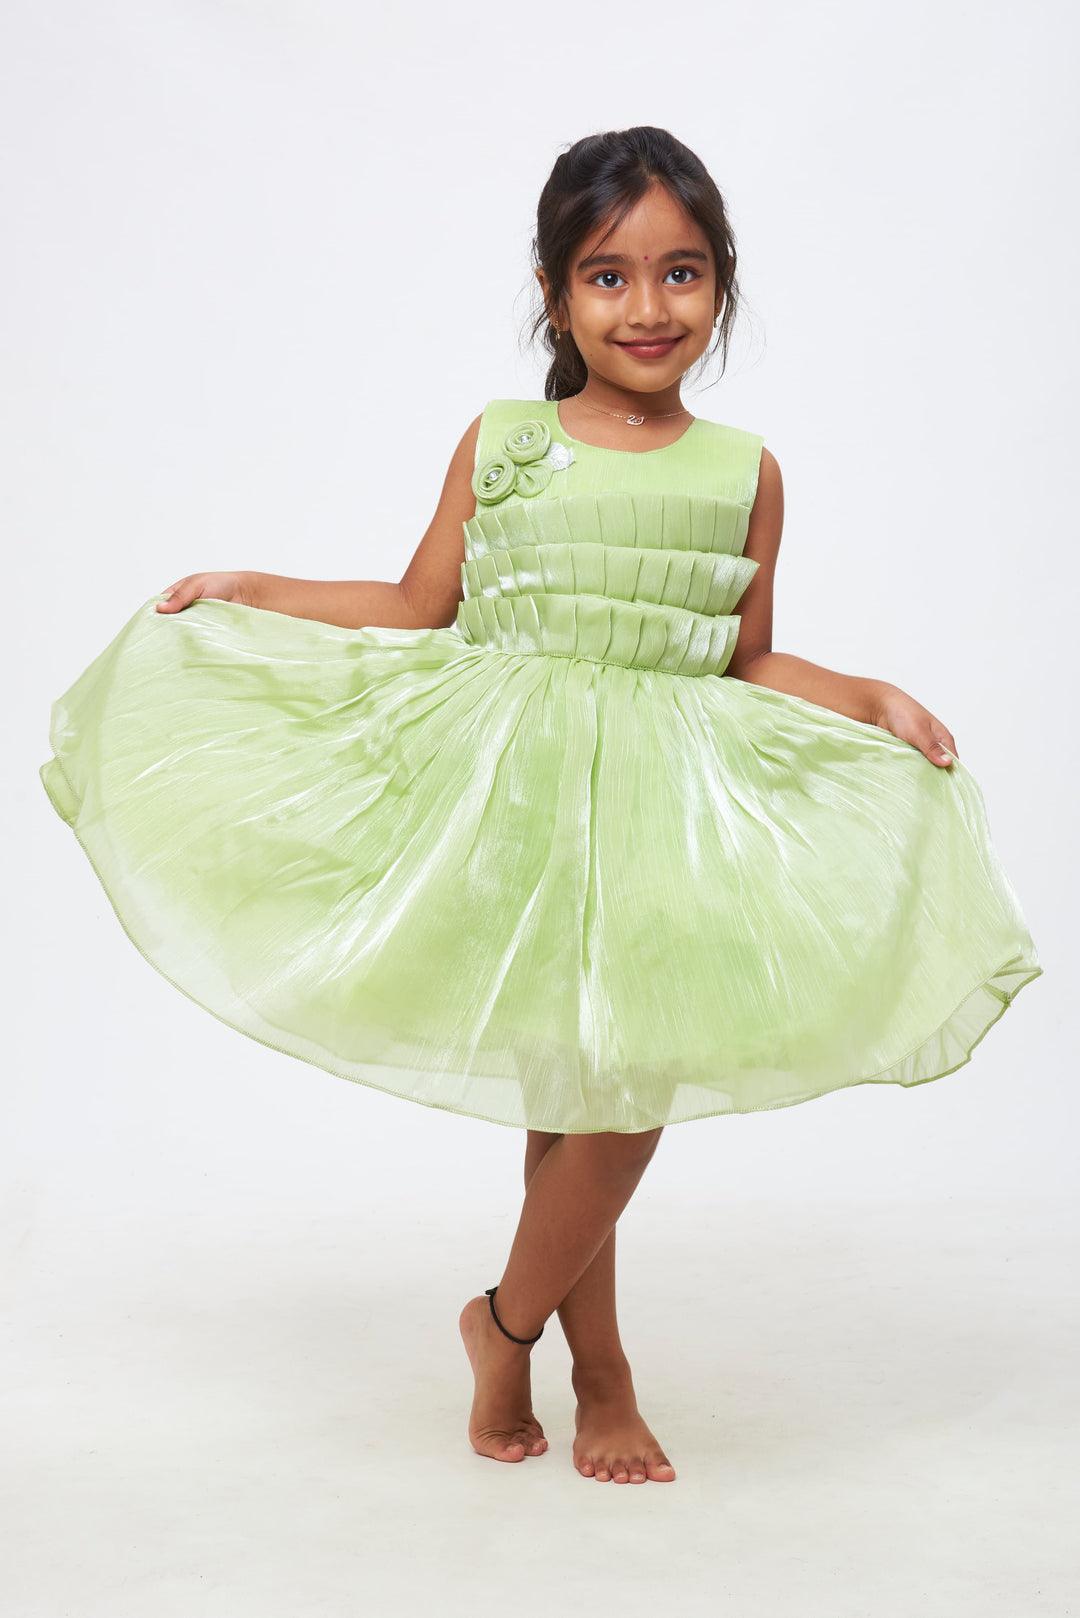 The Nesavu Girls Fancy Party Frock Emerald Enchantment: Girls Soft Green Tulle Dress with Rosette Accents Nesavu 16 (1Y) / Green / Satin Organza PF155C-16 Elegance at Every Event | Girls Designer Party Frocks | The Nesavu